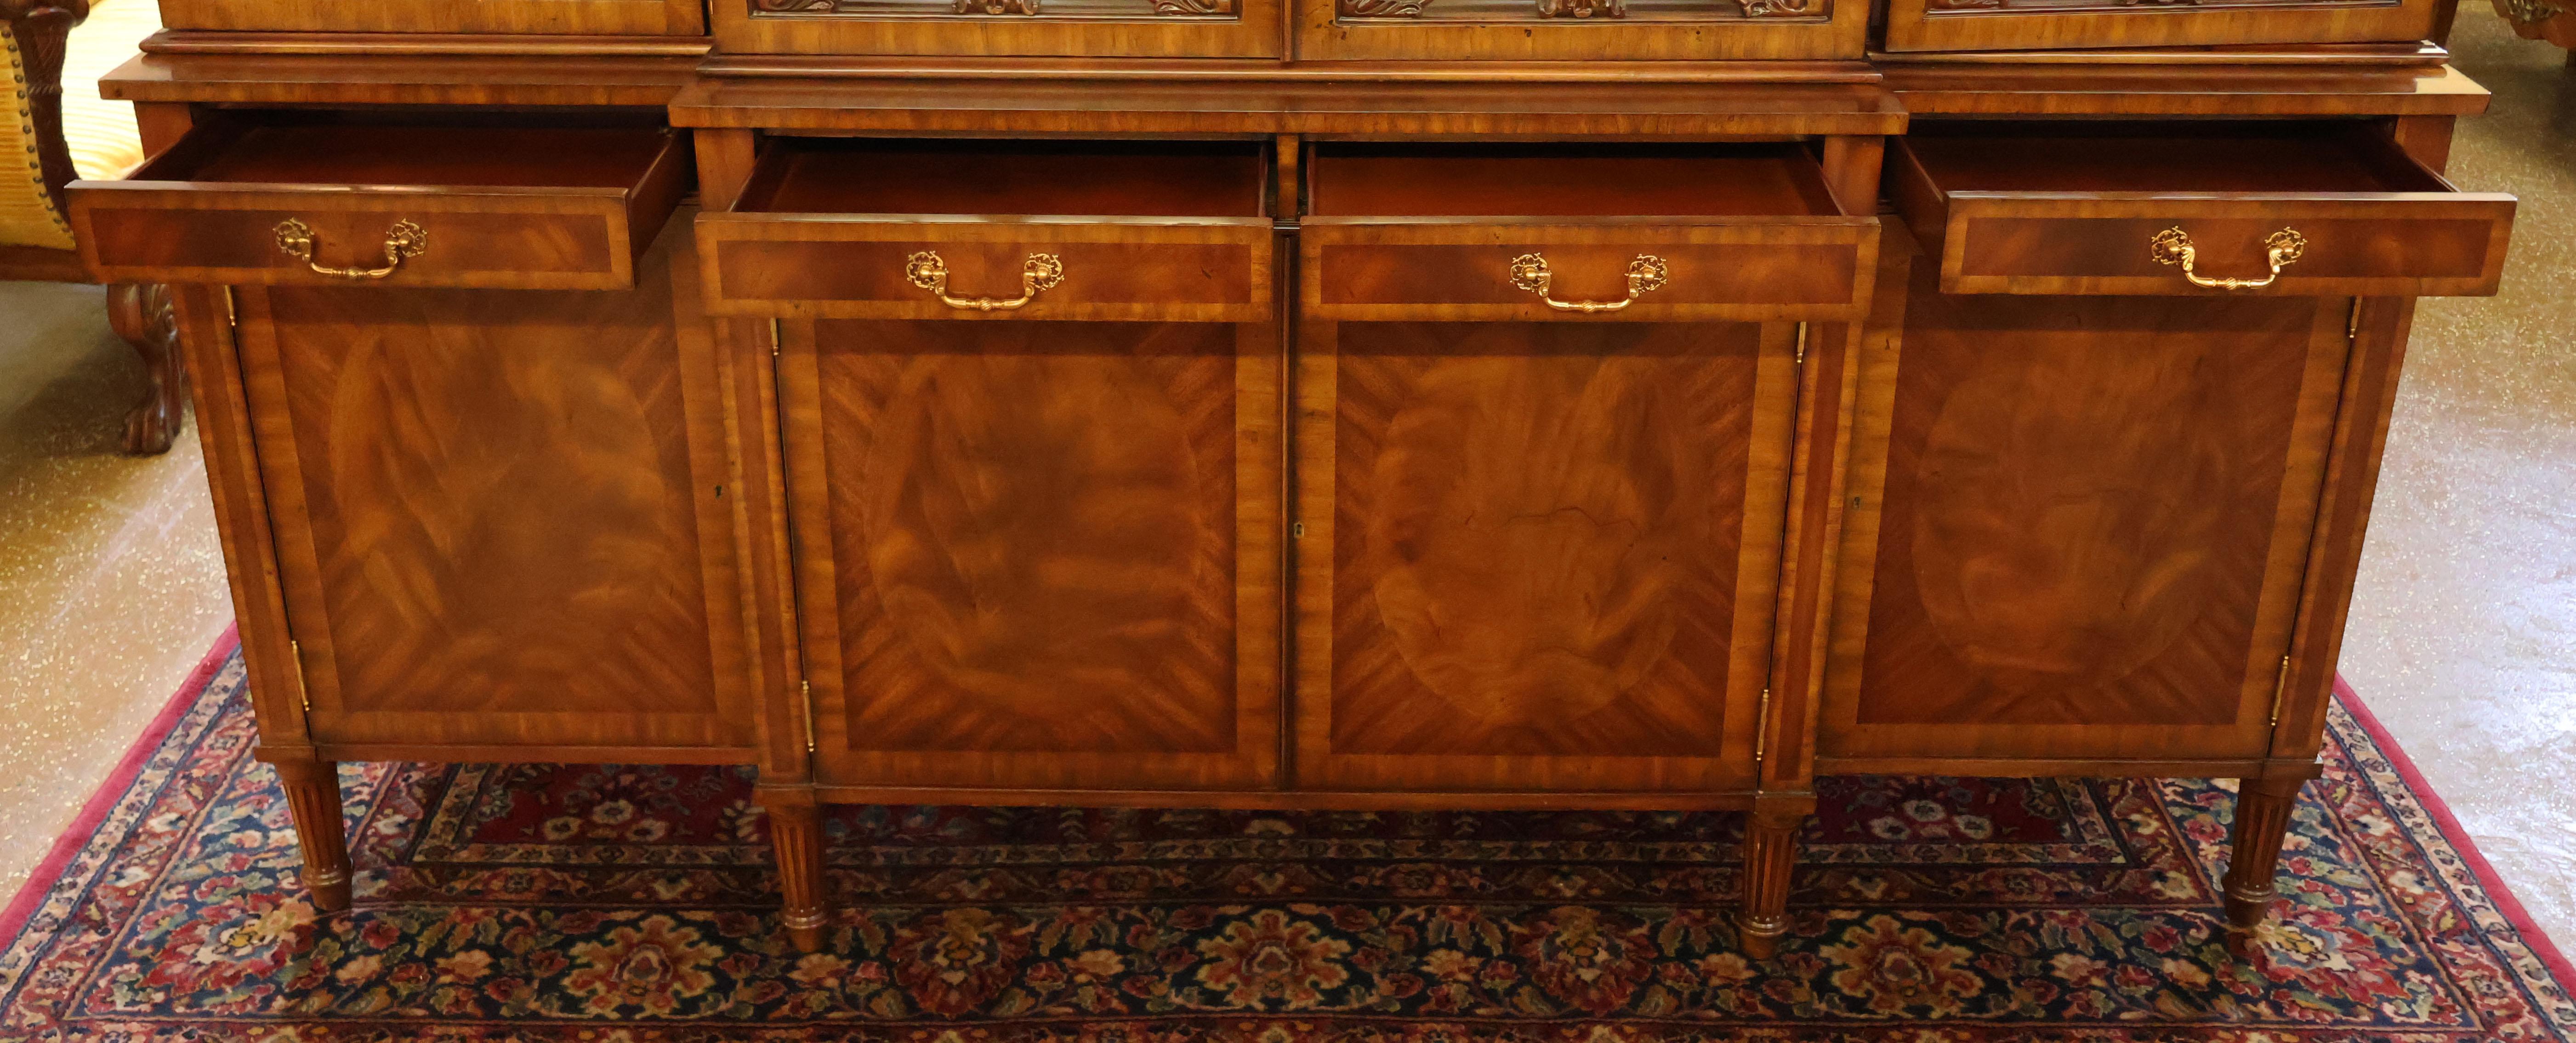 Monumental Mahogany Maitland Smith Bookcase China Cabinet Breakfront In Good Condition For Sale In Long Branch, NJ